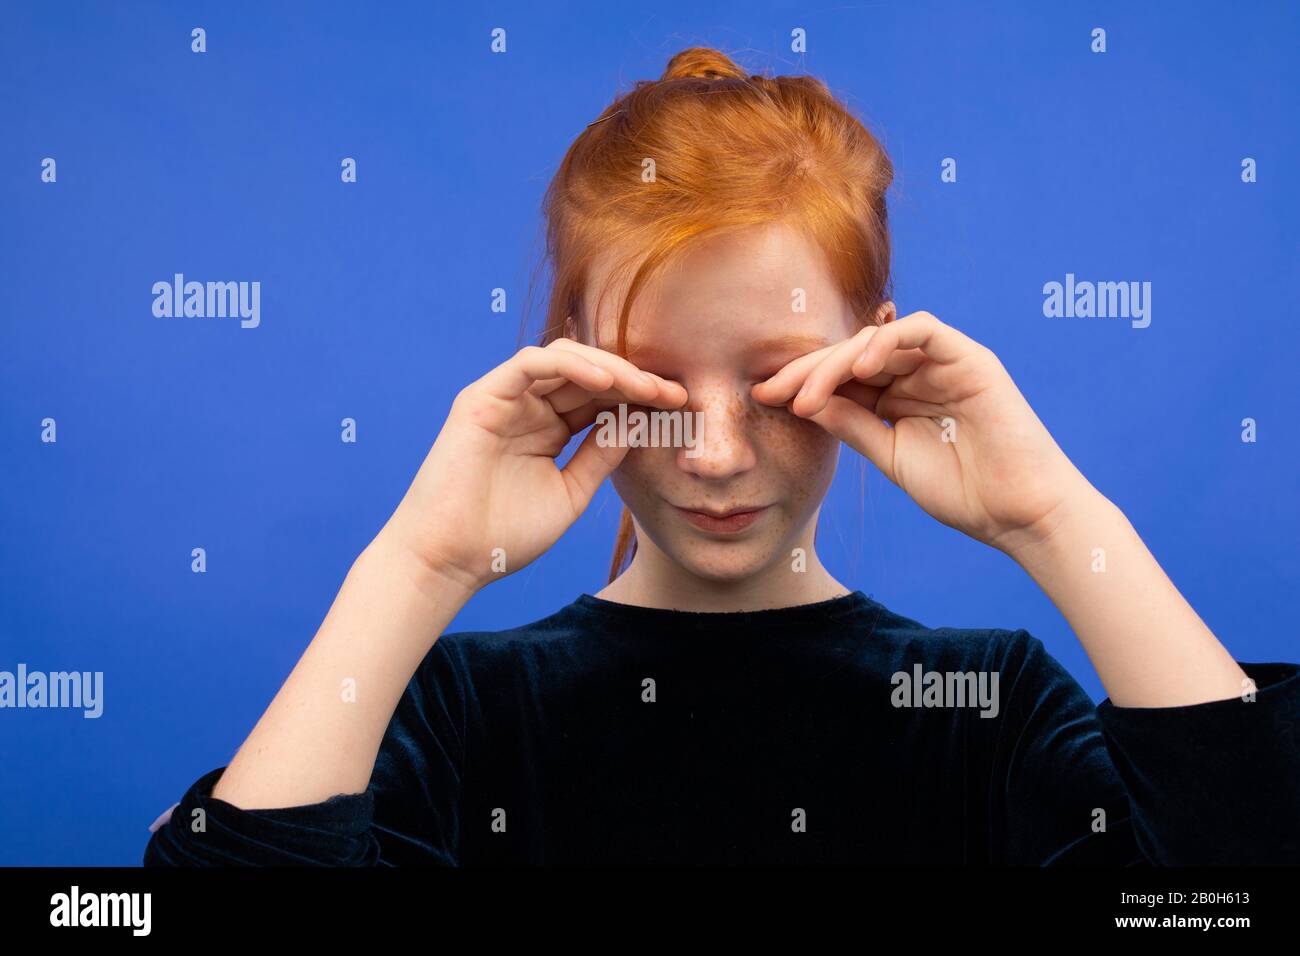 girl rubs her eyes due to dryness on a blue background Stock Photo